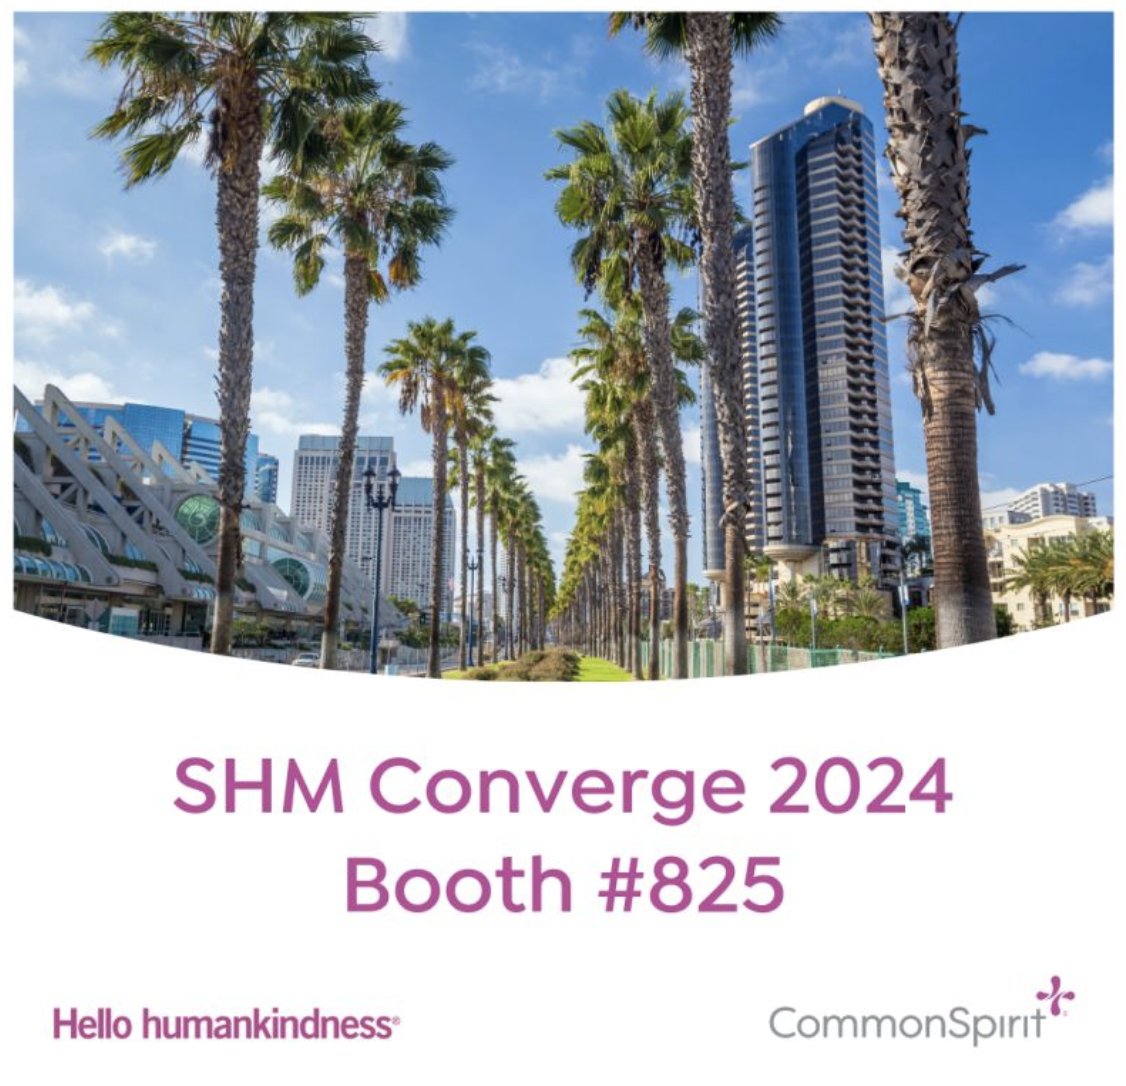 .@CommonSpirit Health will be in San Diego for Society of Hospital Medicine (SHM) Converge 2024. Visit Booth 825 to learn about the amazing hospitalist physician and provider opportunities throughout our health system!